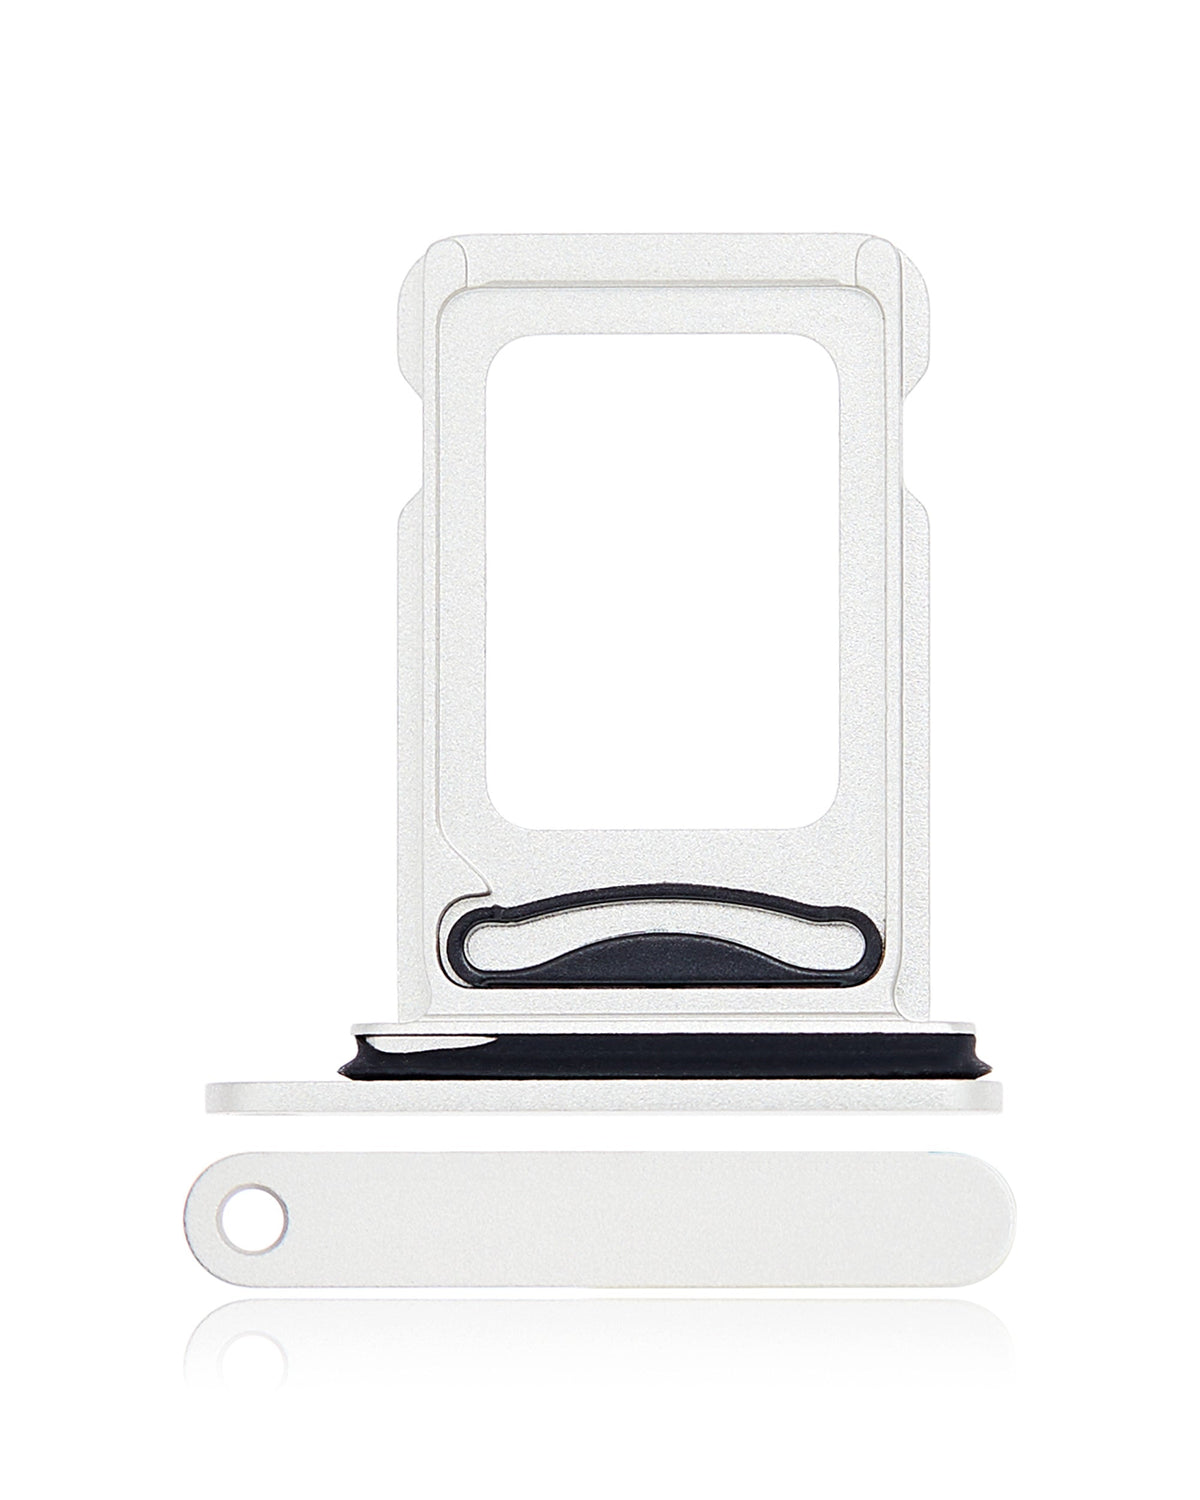 STARLIGHT DUAL SIM CARD TRAY COMPATIBLE WITH IPHONE 13